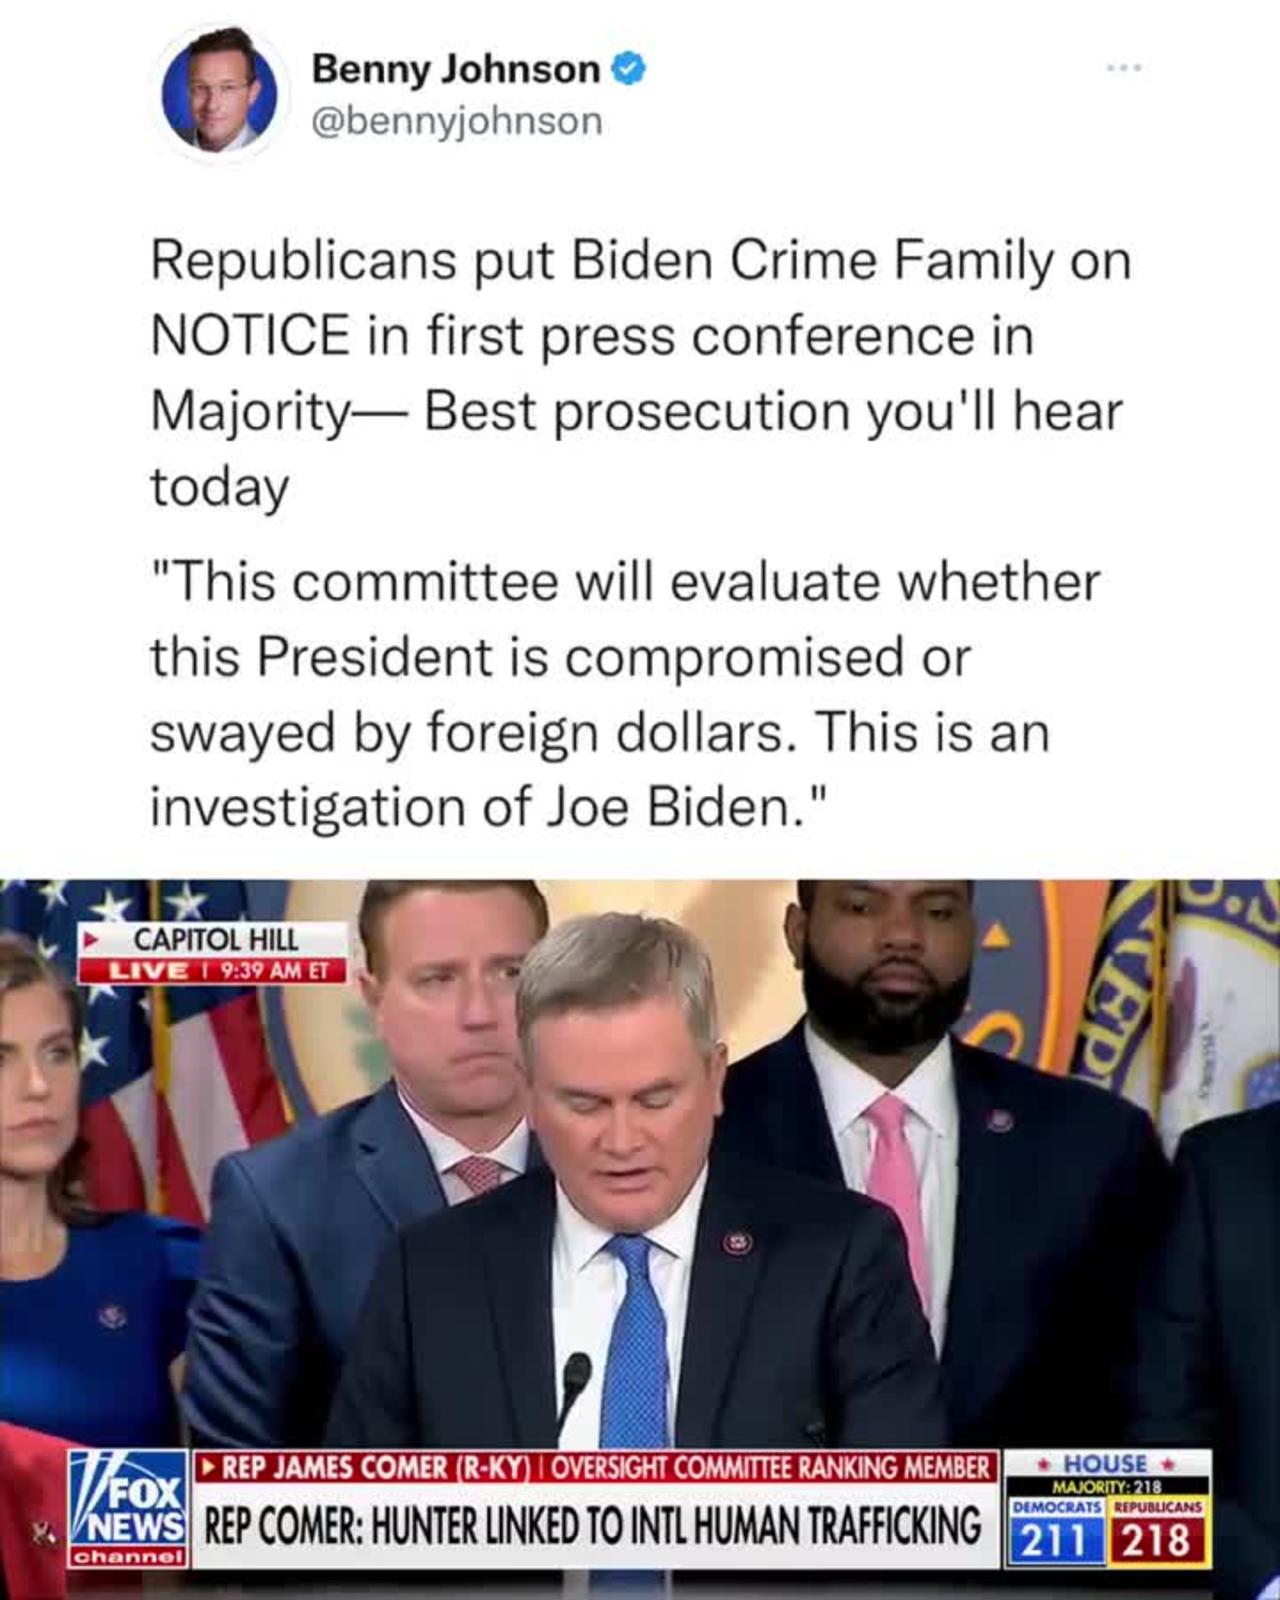 HCNN- Republicans put Biden Crime Family on NOTICE in first press conference in